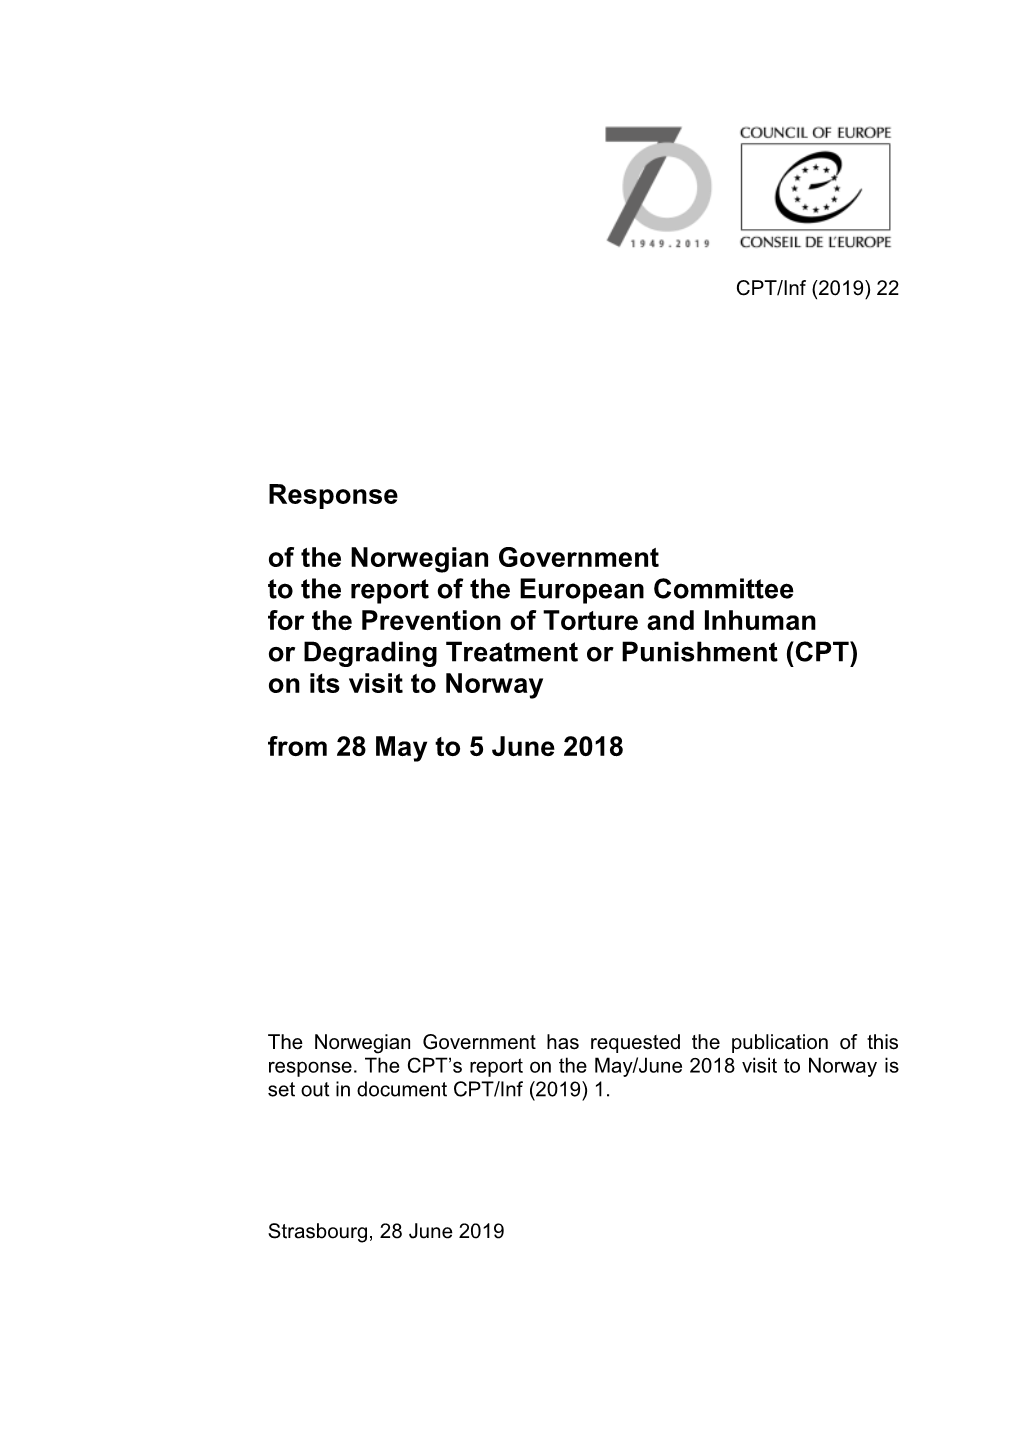 Response of the Norwegian Government to the Report of the European Committee for the Prevention of Torture and Inhuman Or Degrad